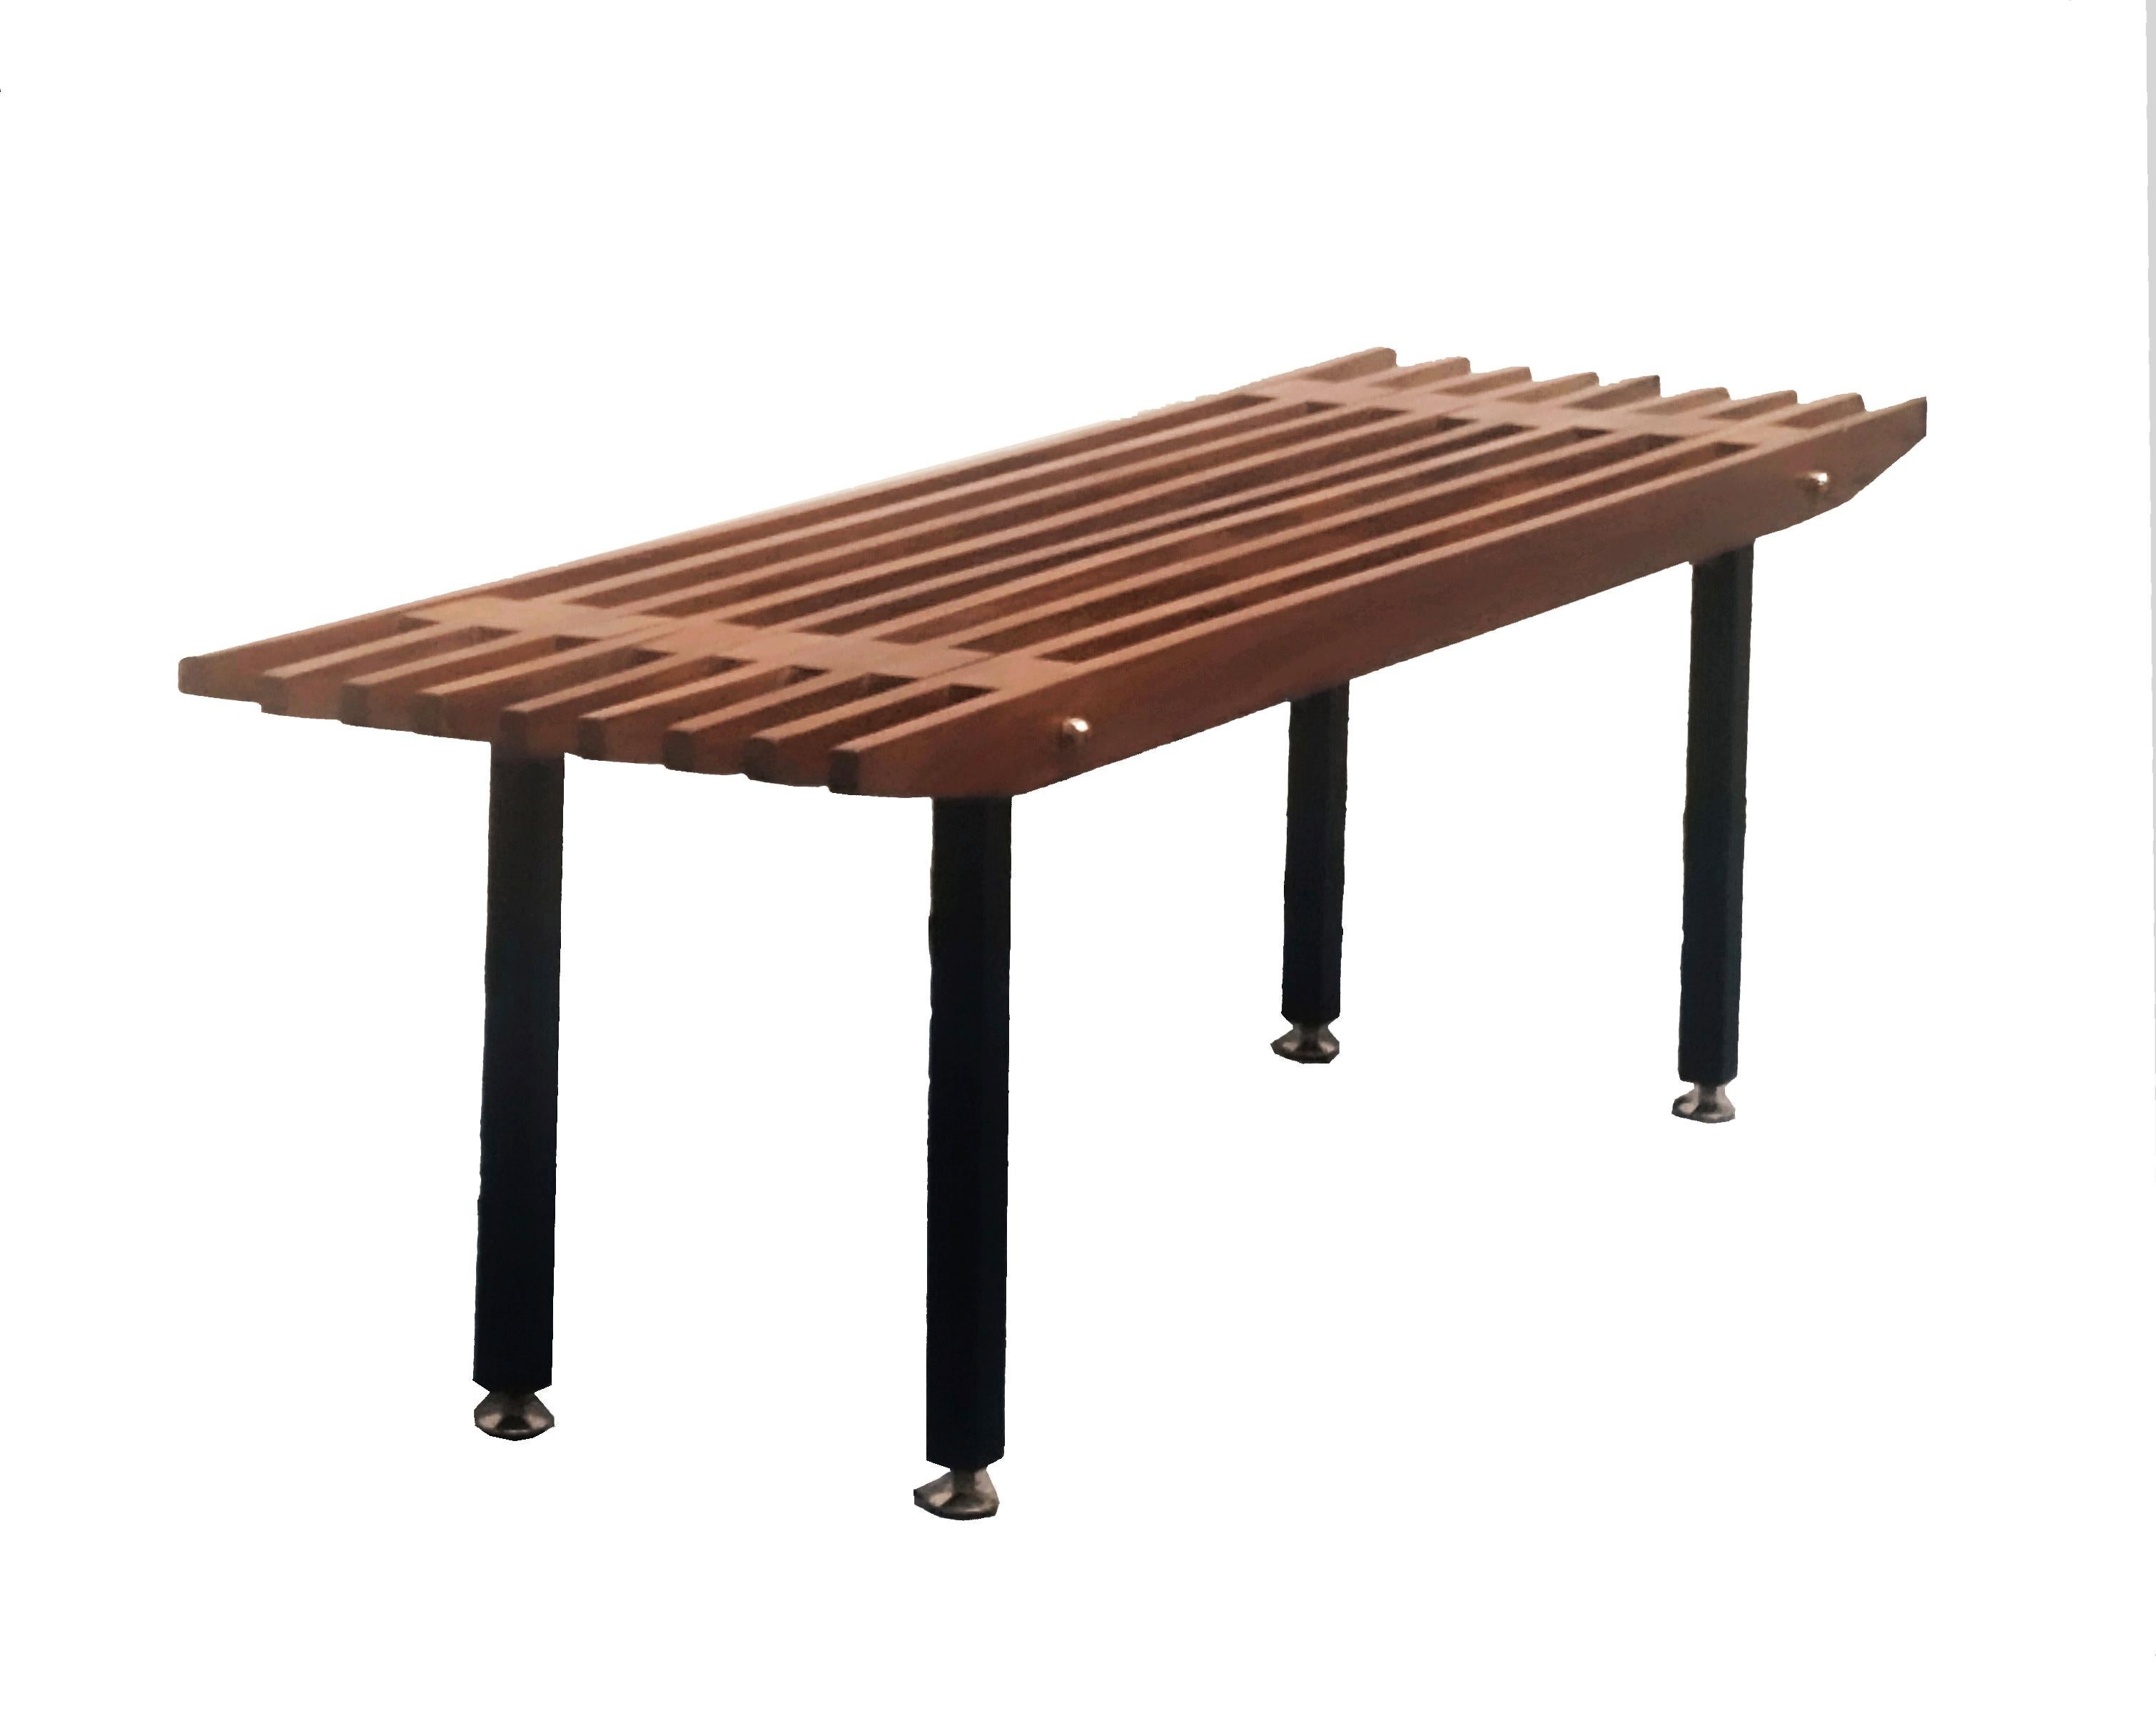 Teak wood bench, Italian production 1960s. The bench is made of teak strips, black metal frame with  brass feet.